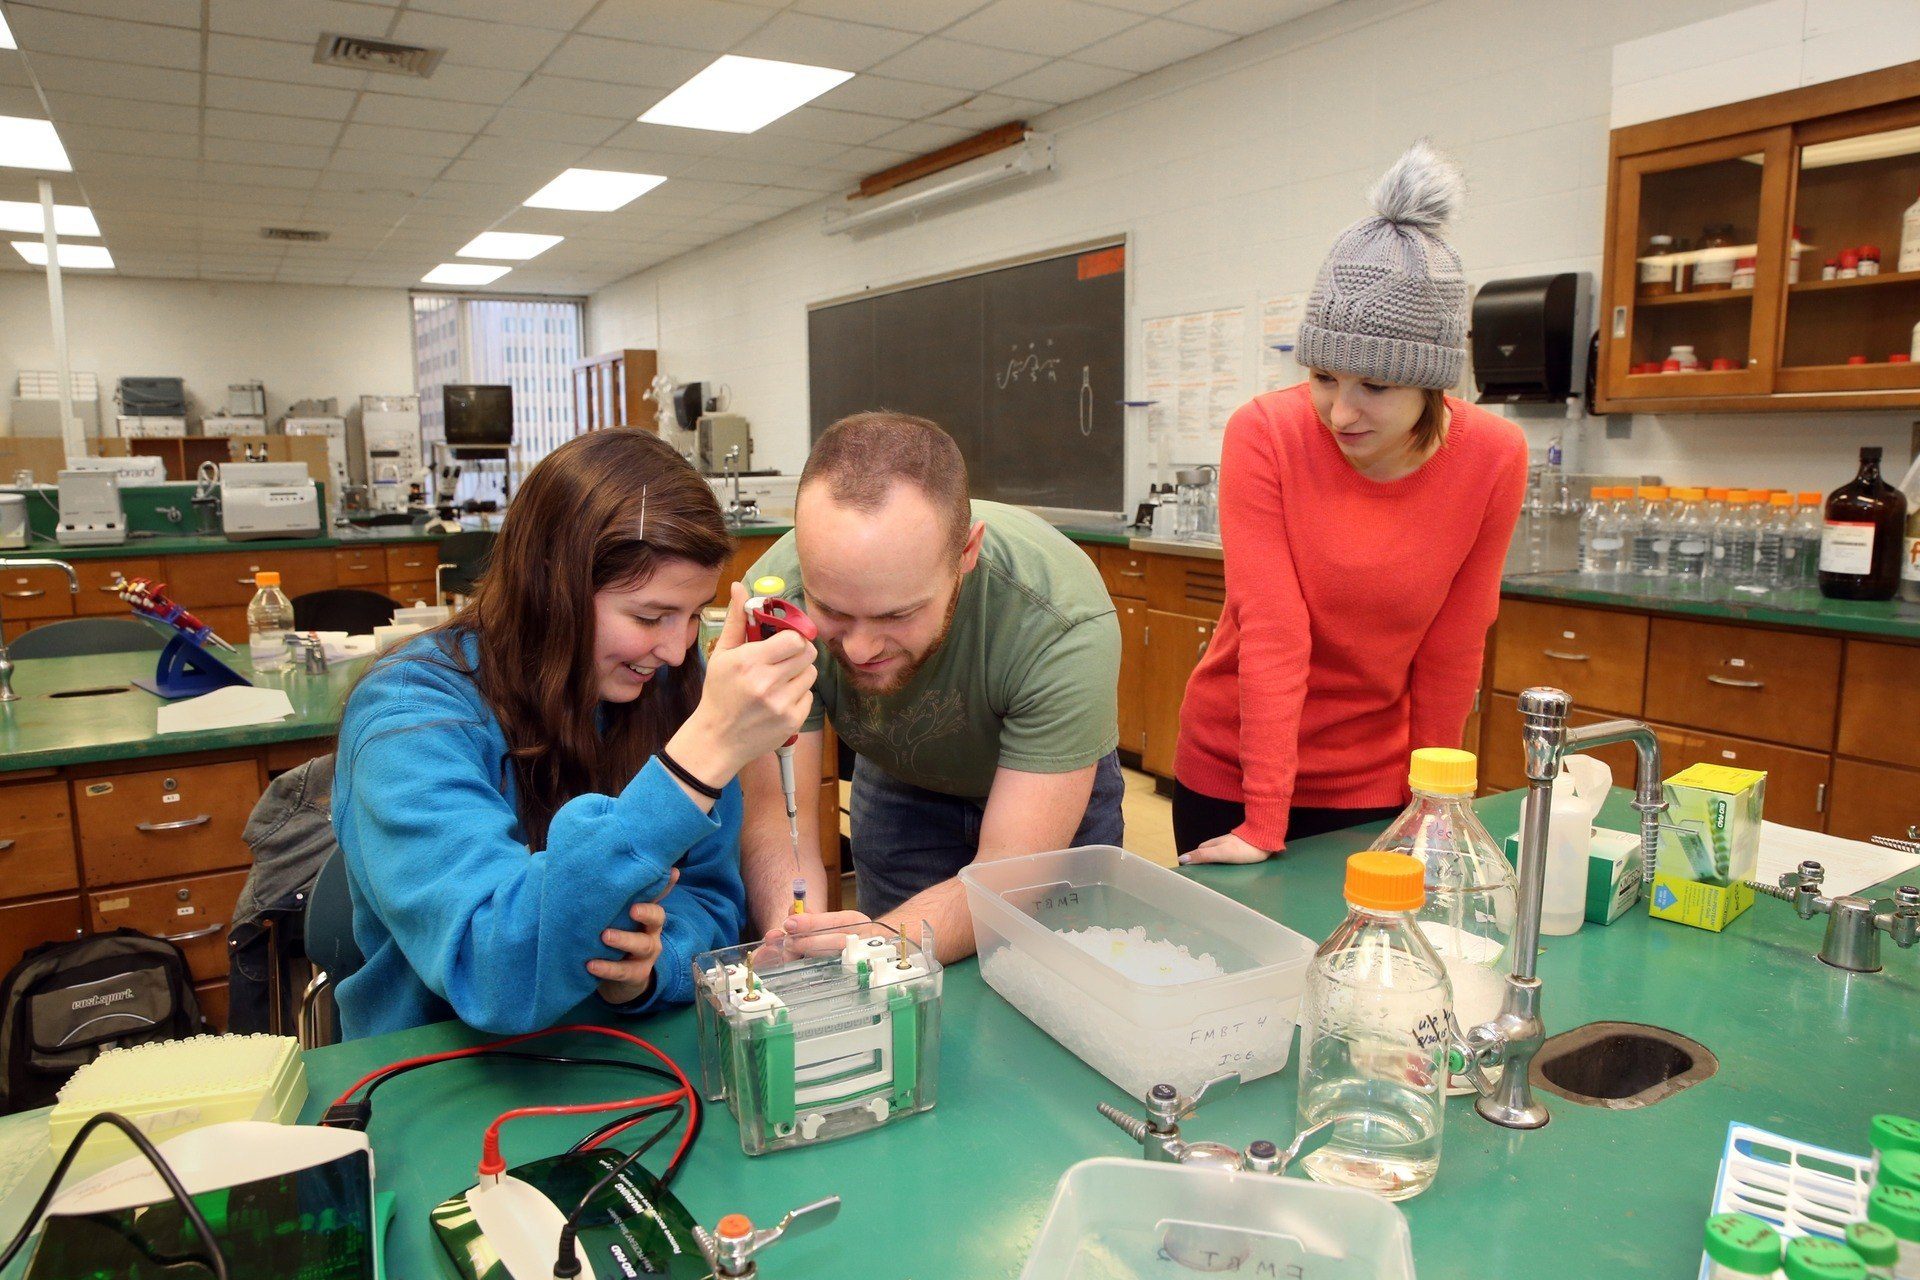 BGSU forensic college degree students analyze samples in a lab near the crime lab on the Ohio campus.